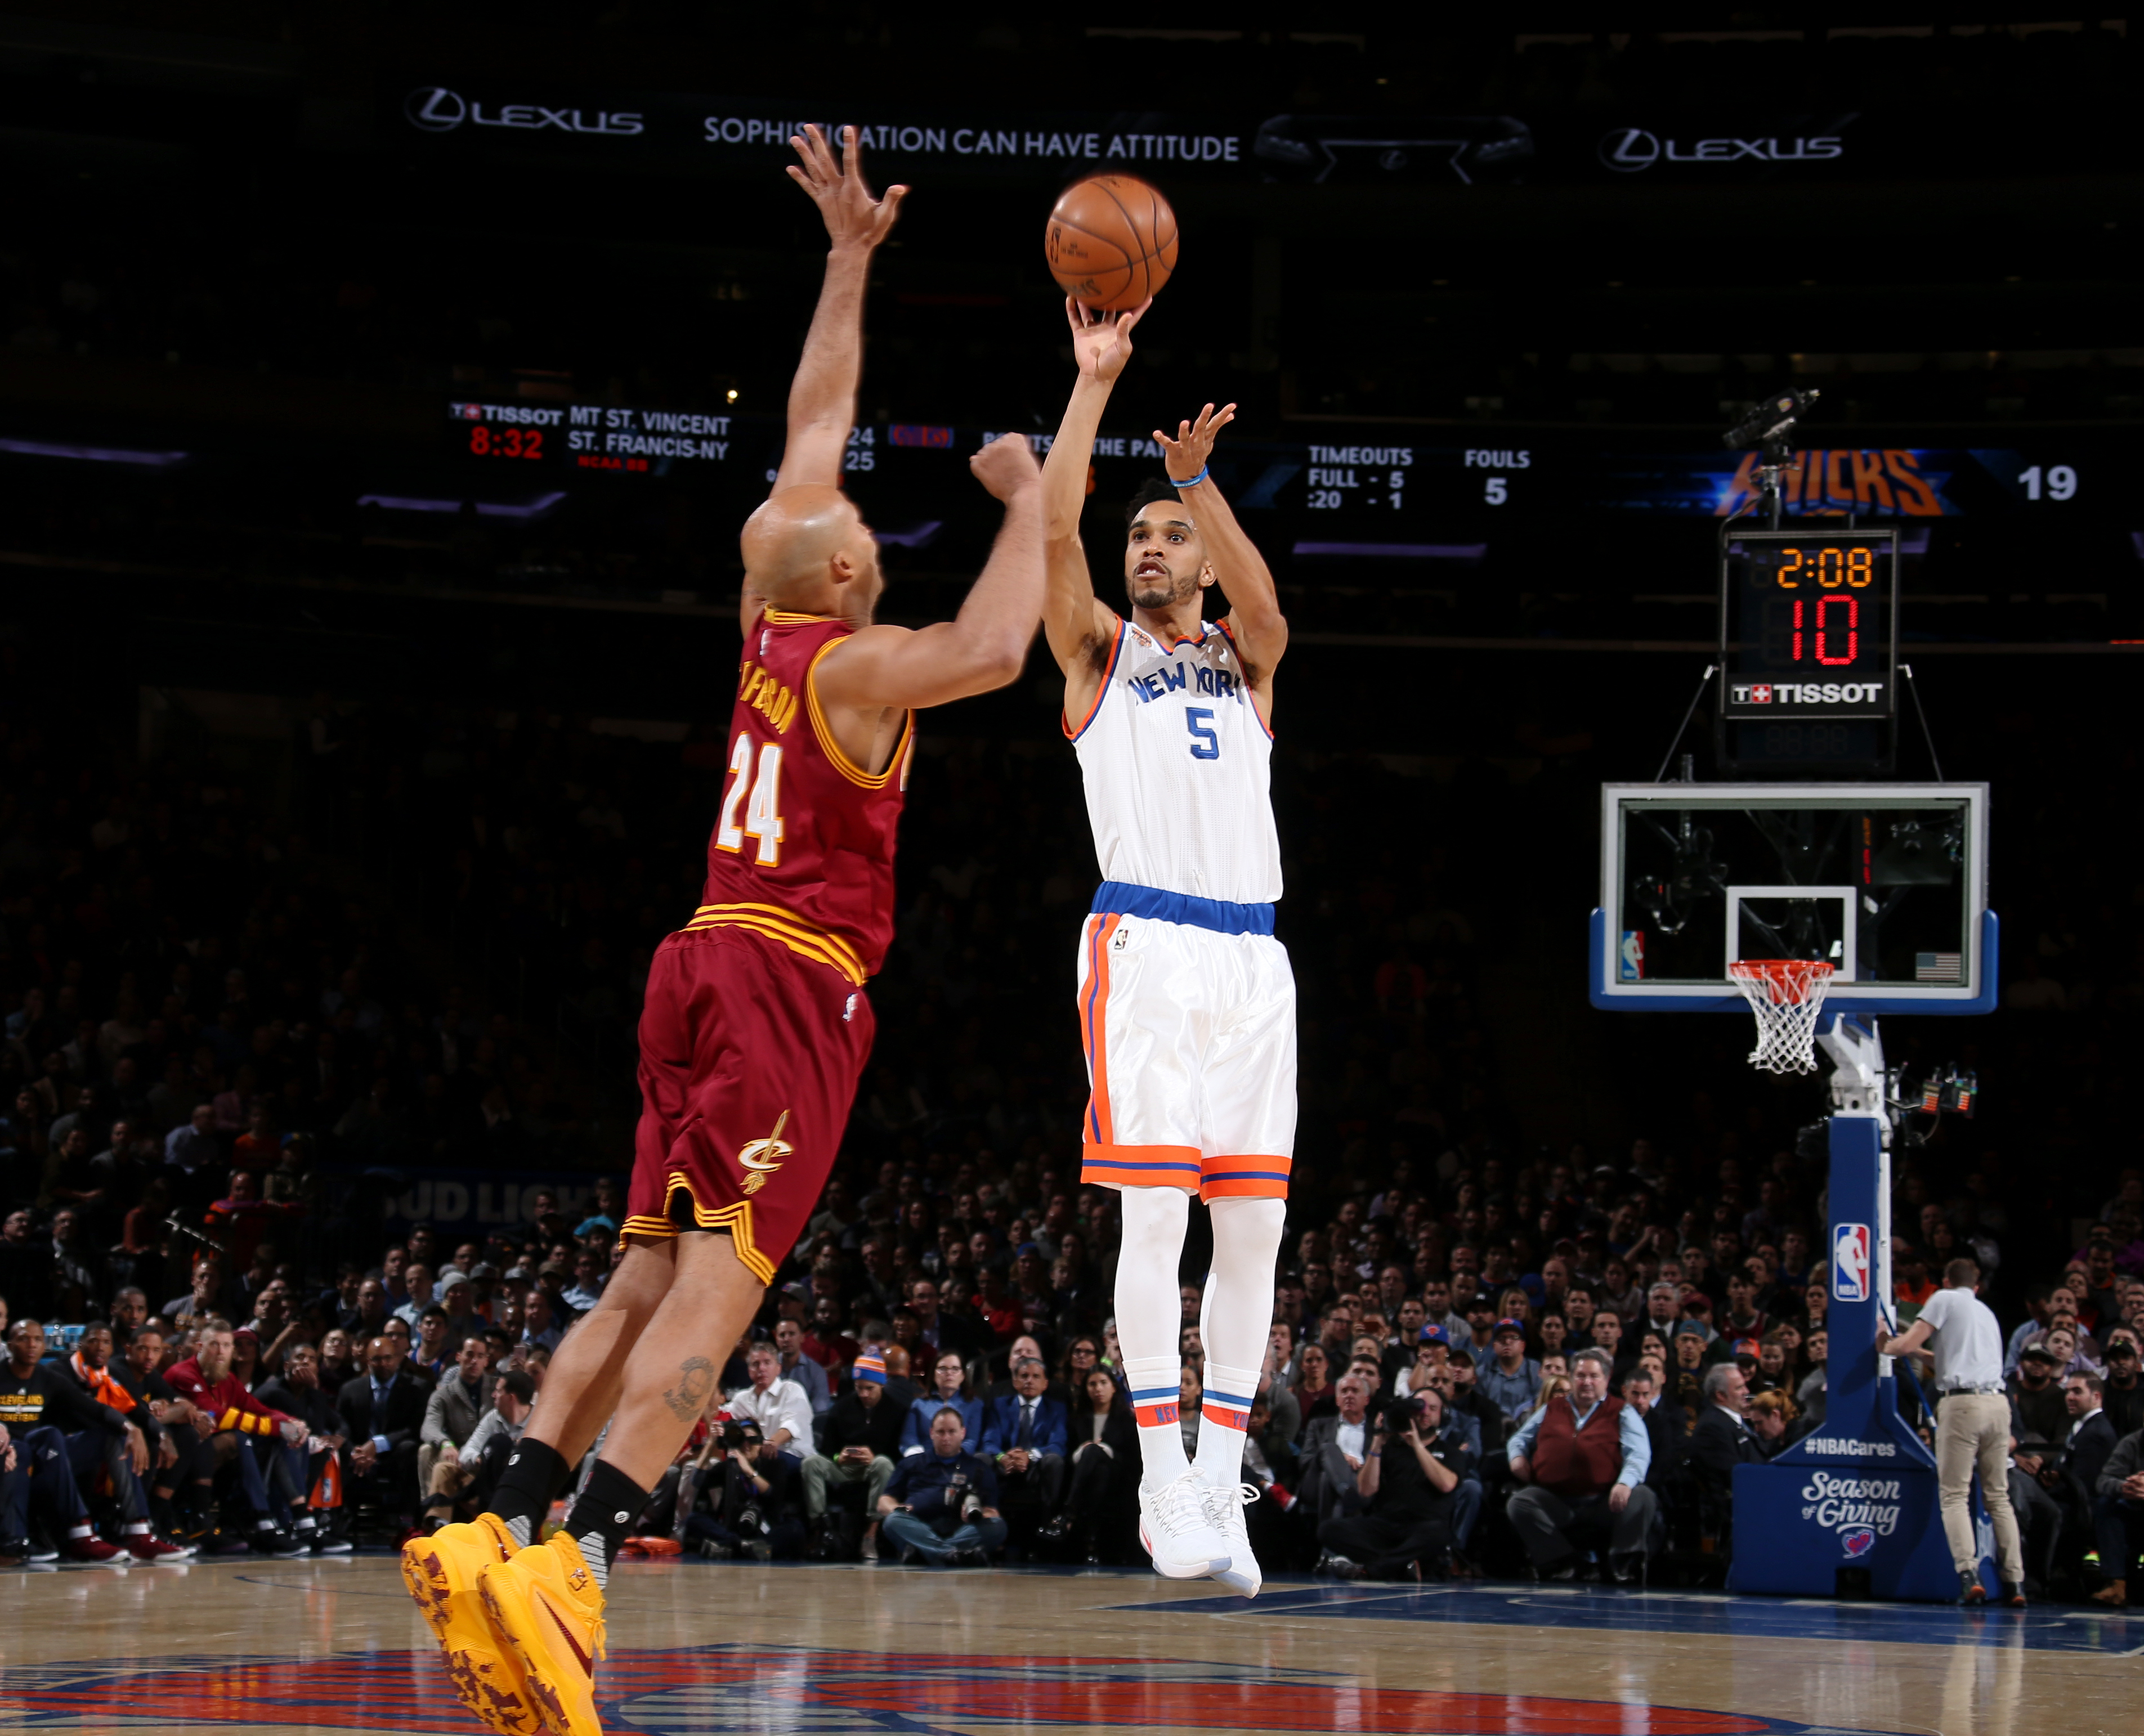 NEW YORK CITY - DECEMBER 7: Courtney Lee #5 of the New York Knicks shoots over Richard Jefferson #24 of the Cleveland Cavaliers during a game between the Cleveland Cavaliers and the New York Knicks at Madison Square Garden in New York, New York. NOTE TO USER: User expressly acknowledges and agrees that, by downloading and/or using this Photograph, user is consenting to the terms and conditions of the Getty Images License Agreement. Mandatory Copyright Notice: Copyright 2016 NBAE (Photo by Nathaniel S. Butler/NBAE via Getty Images)